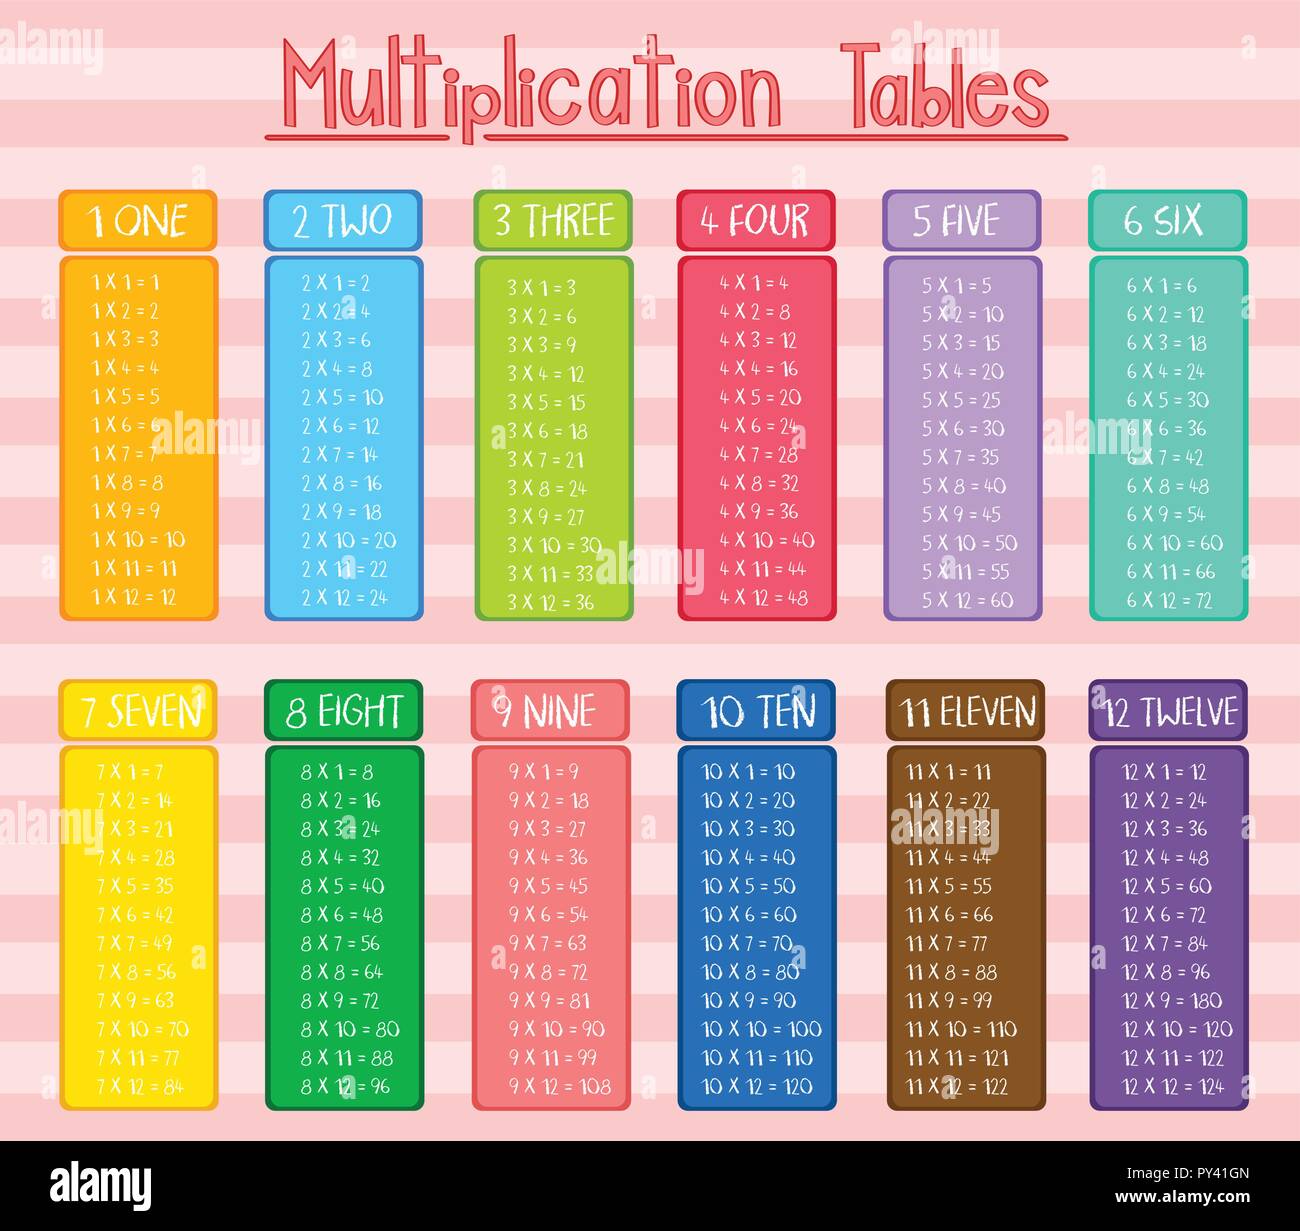 Colorful Multiplication tables poster illustration Stock Vector